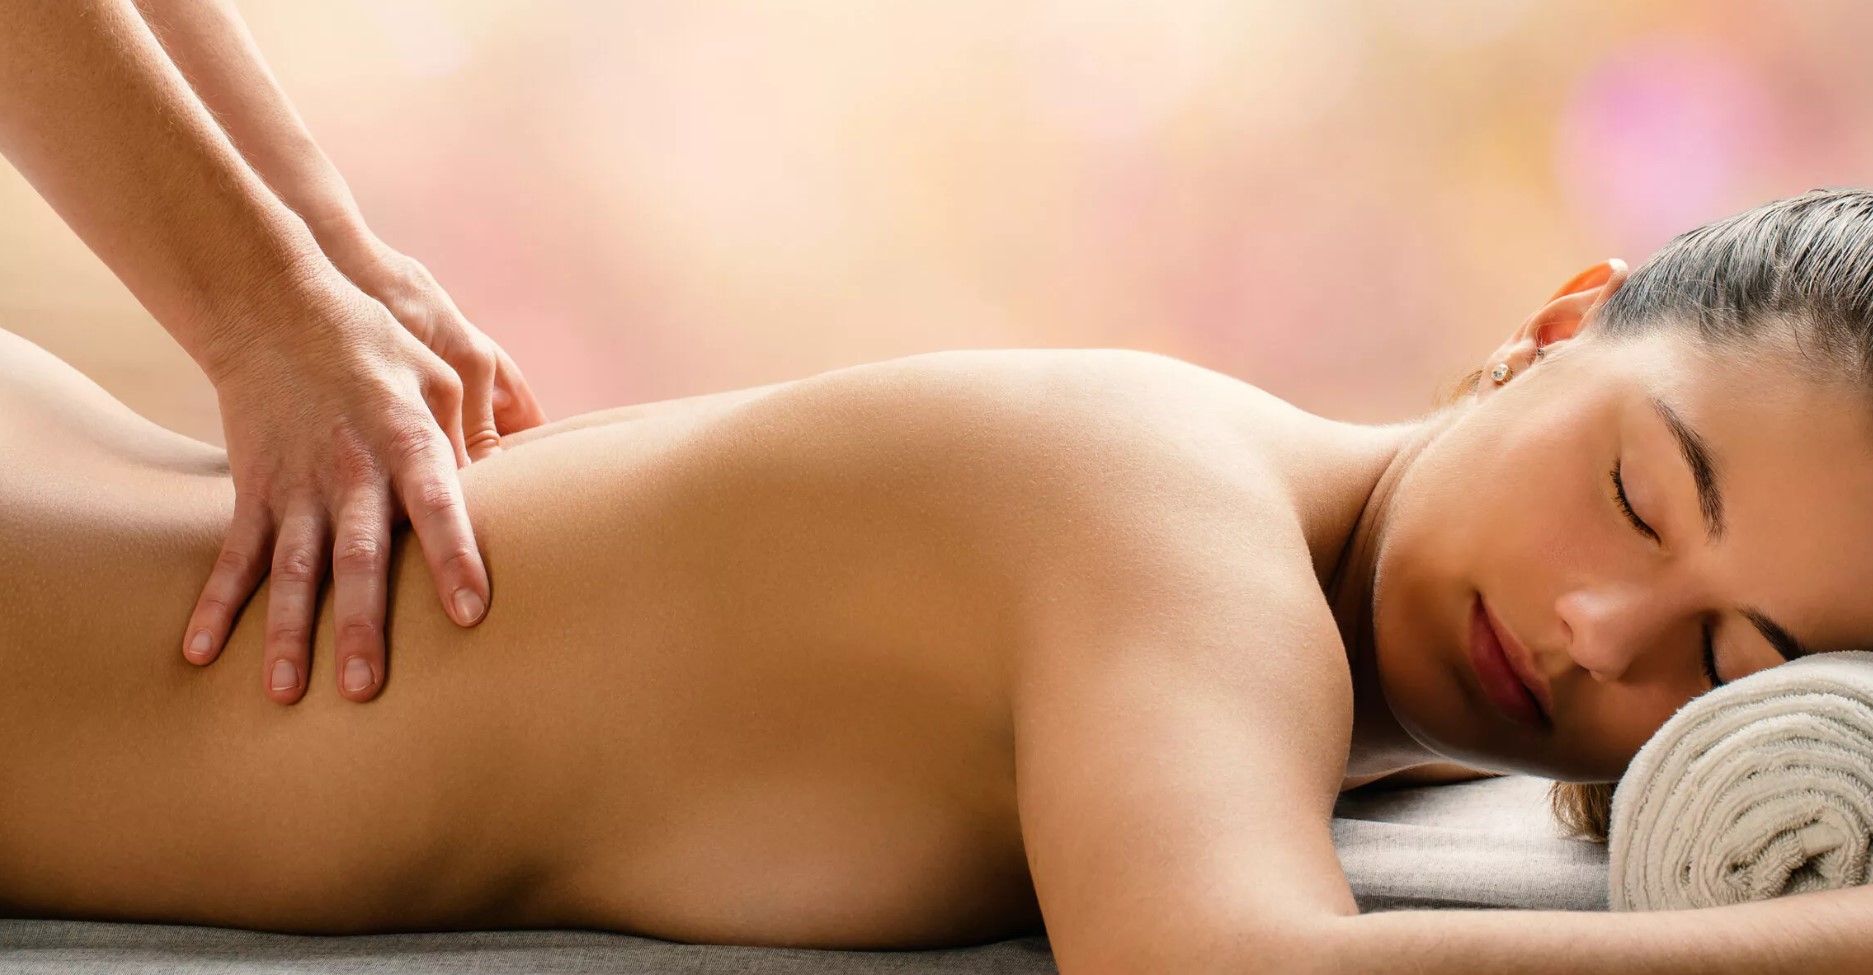 The Psychological Impact of Erotic Massage: An In-depth Study